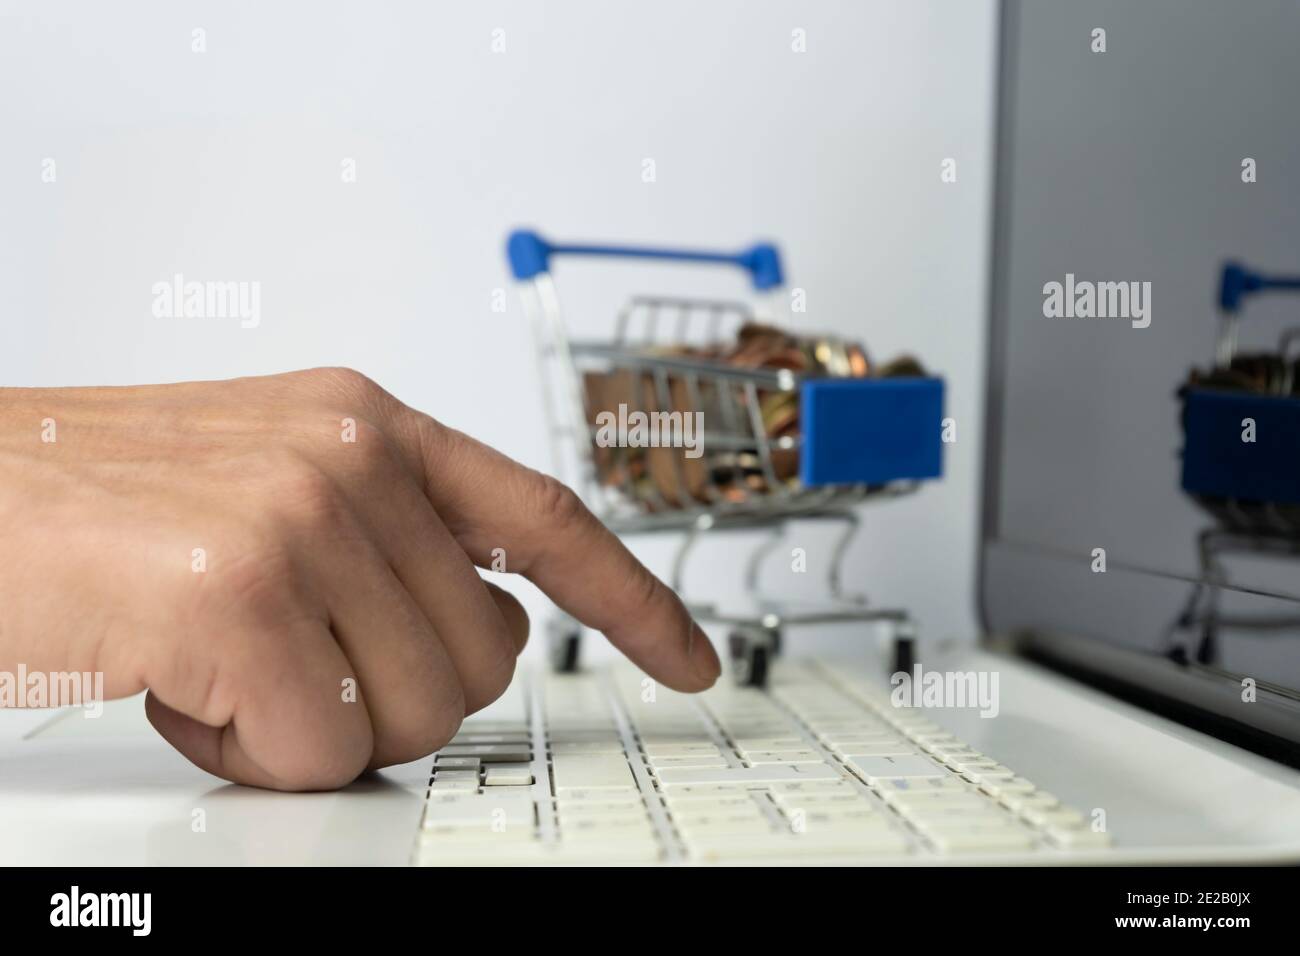 Online shopping e-commerce concept.Man hand using laptop with mini shopping cart full of money coins on background.Business financial spend money life Stock Photo